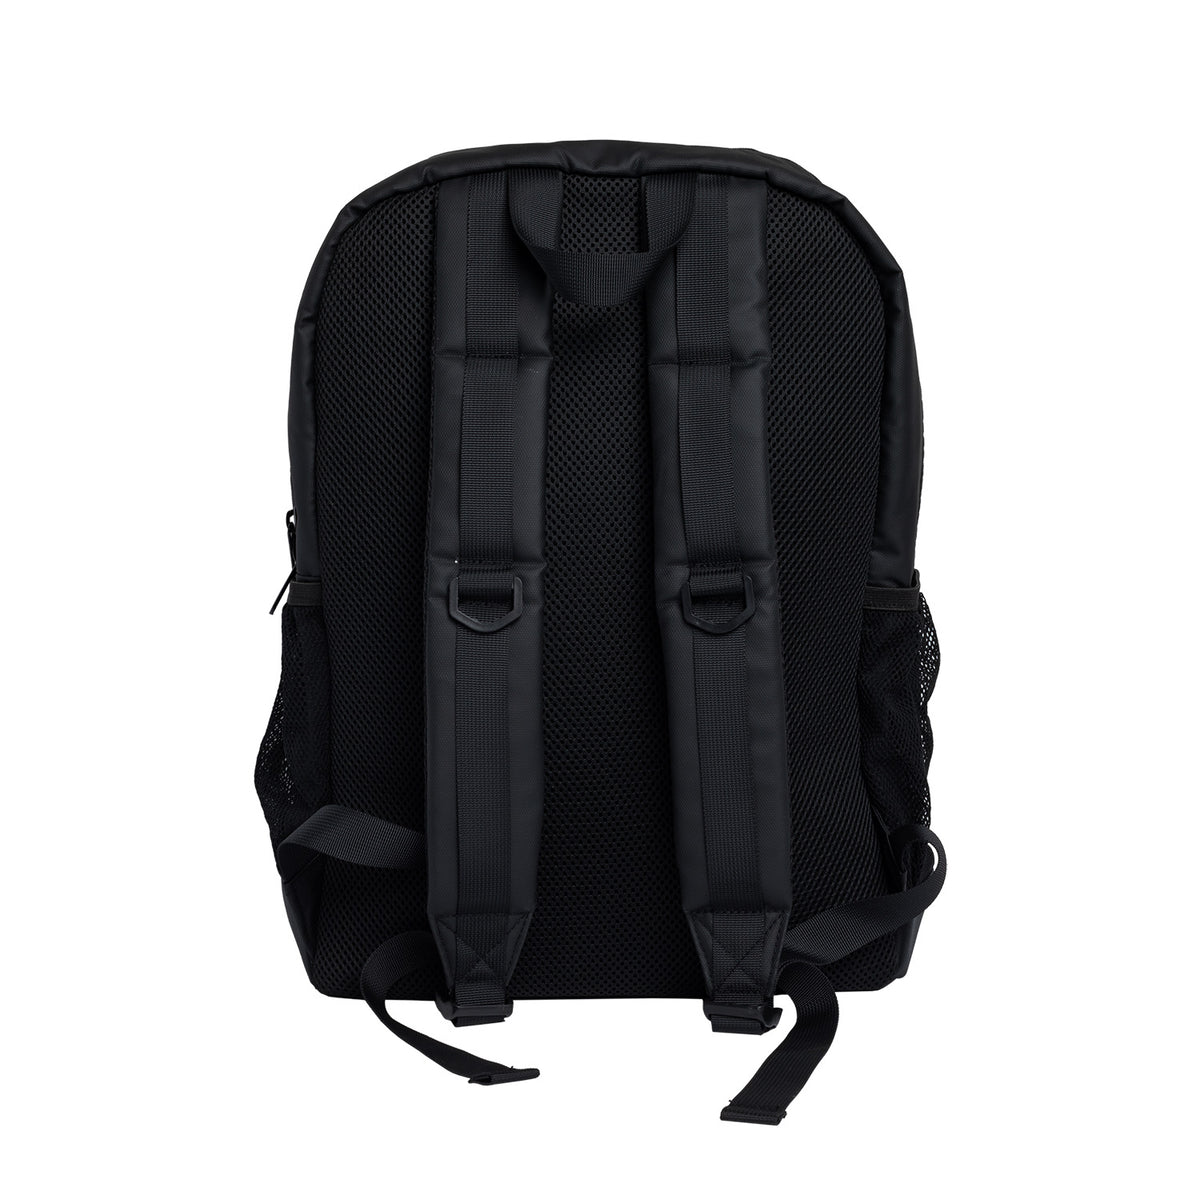 Spitfire Classic 87 Backpack